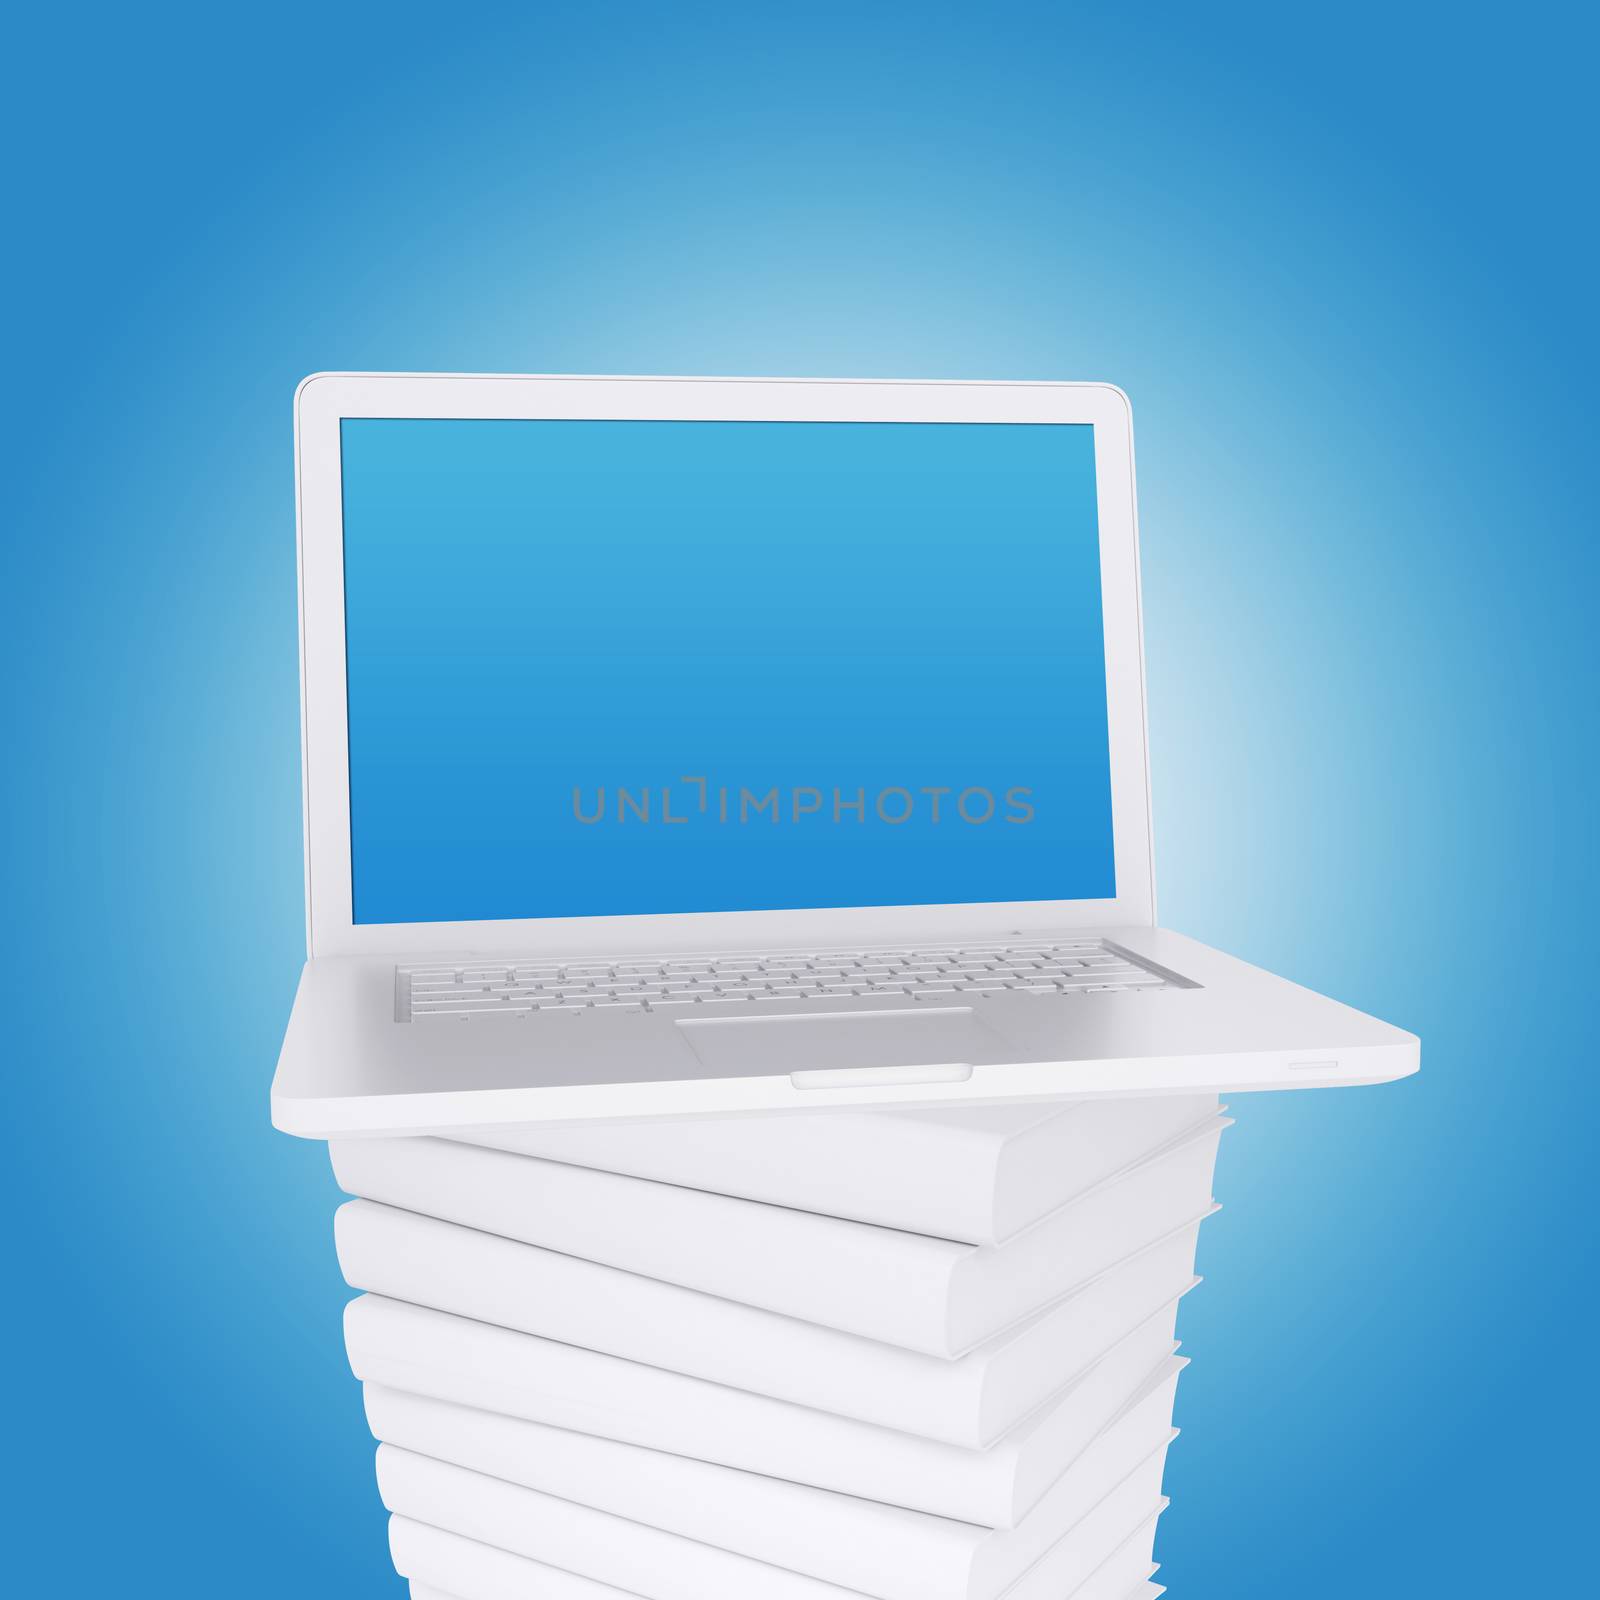 Laptop on a pile of white books. Blue background. Laptop screen is empty